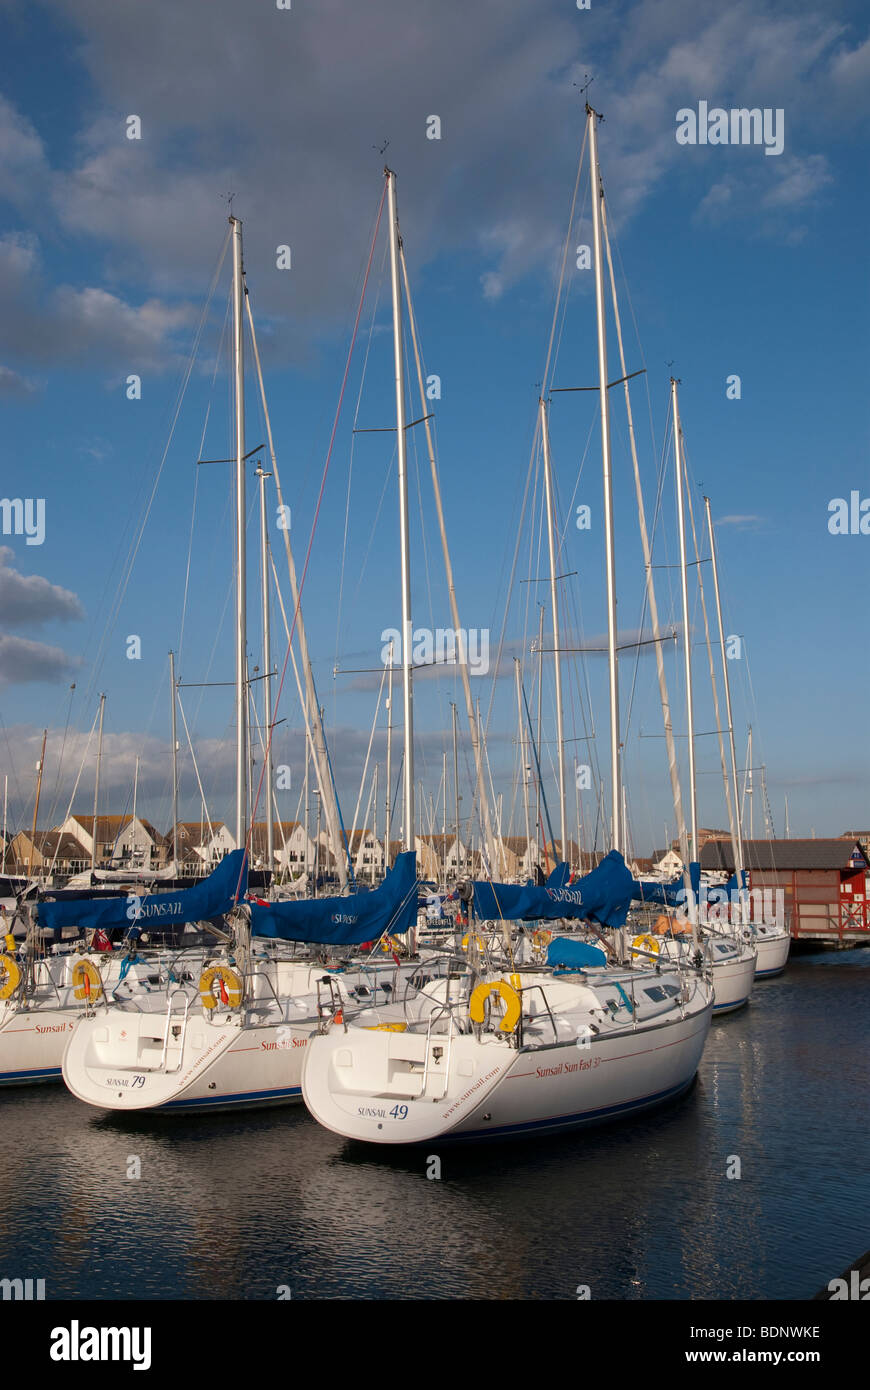 Yachts in marina at Port Solent Stock Photo